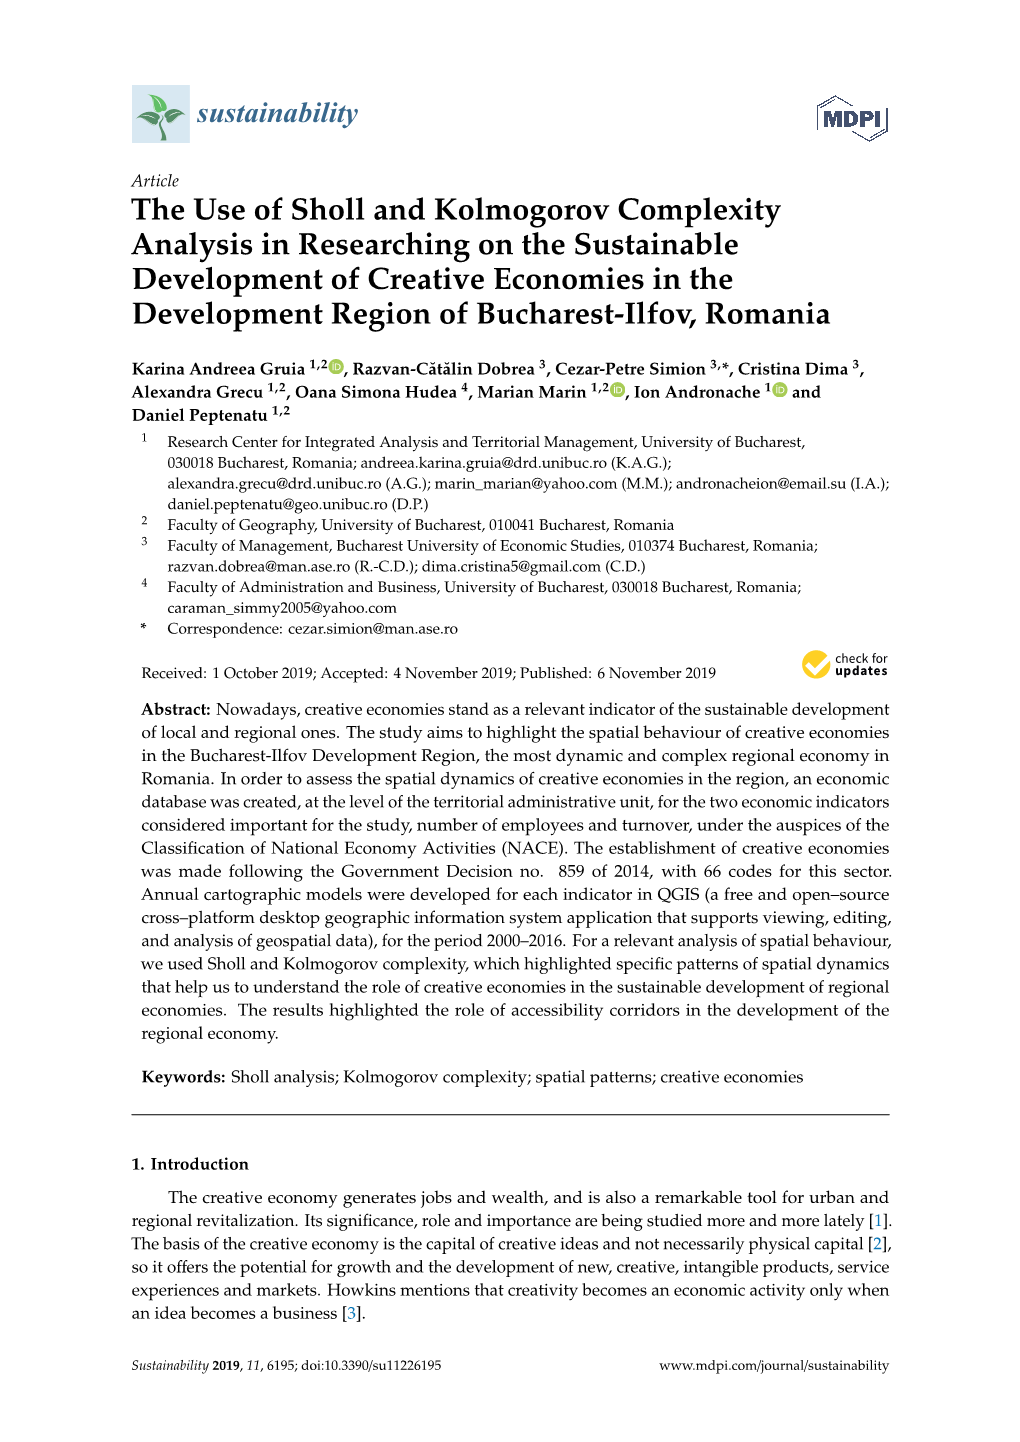 The Use of Sholl and Kolmogorov Complexity Analysis in Researching on the Sustainable Development of Creative Economies in the Development Region of Bucharest-Ilfov, Romania